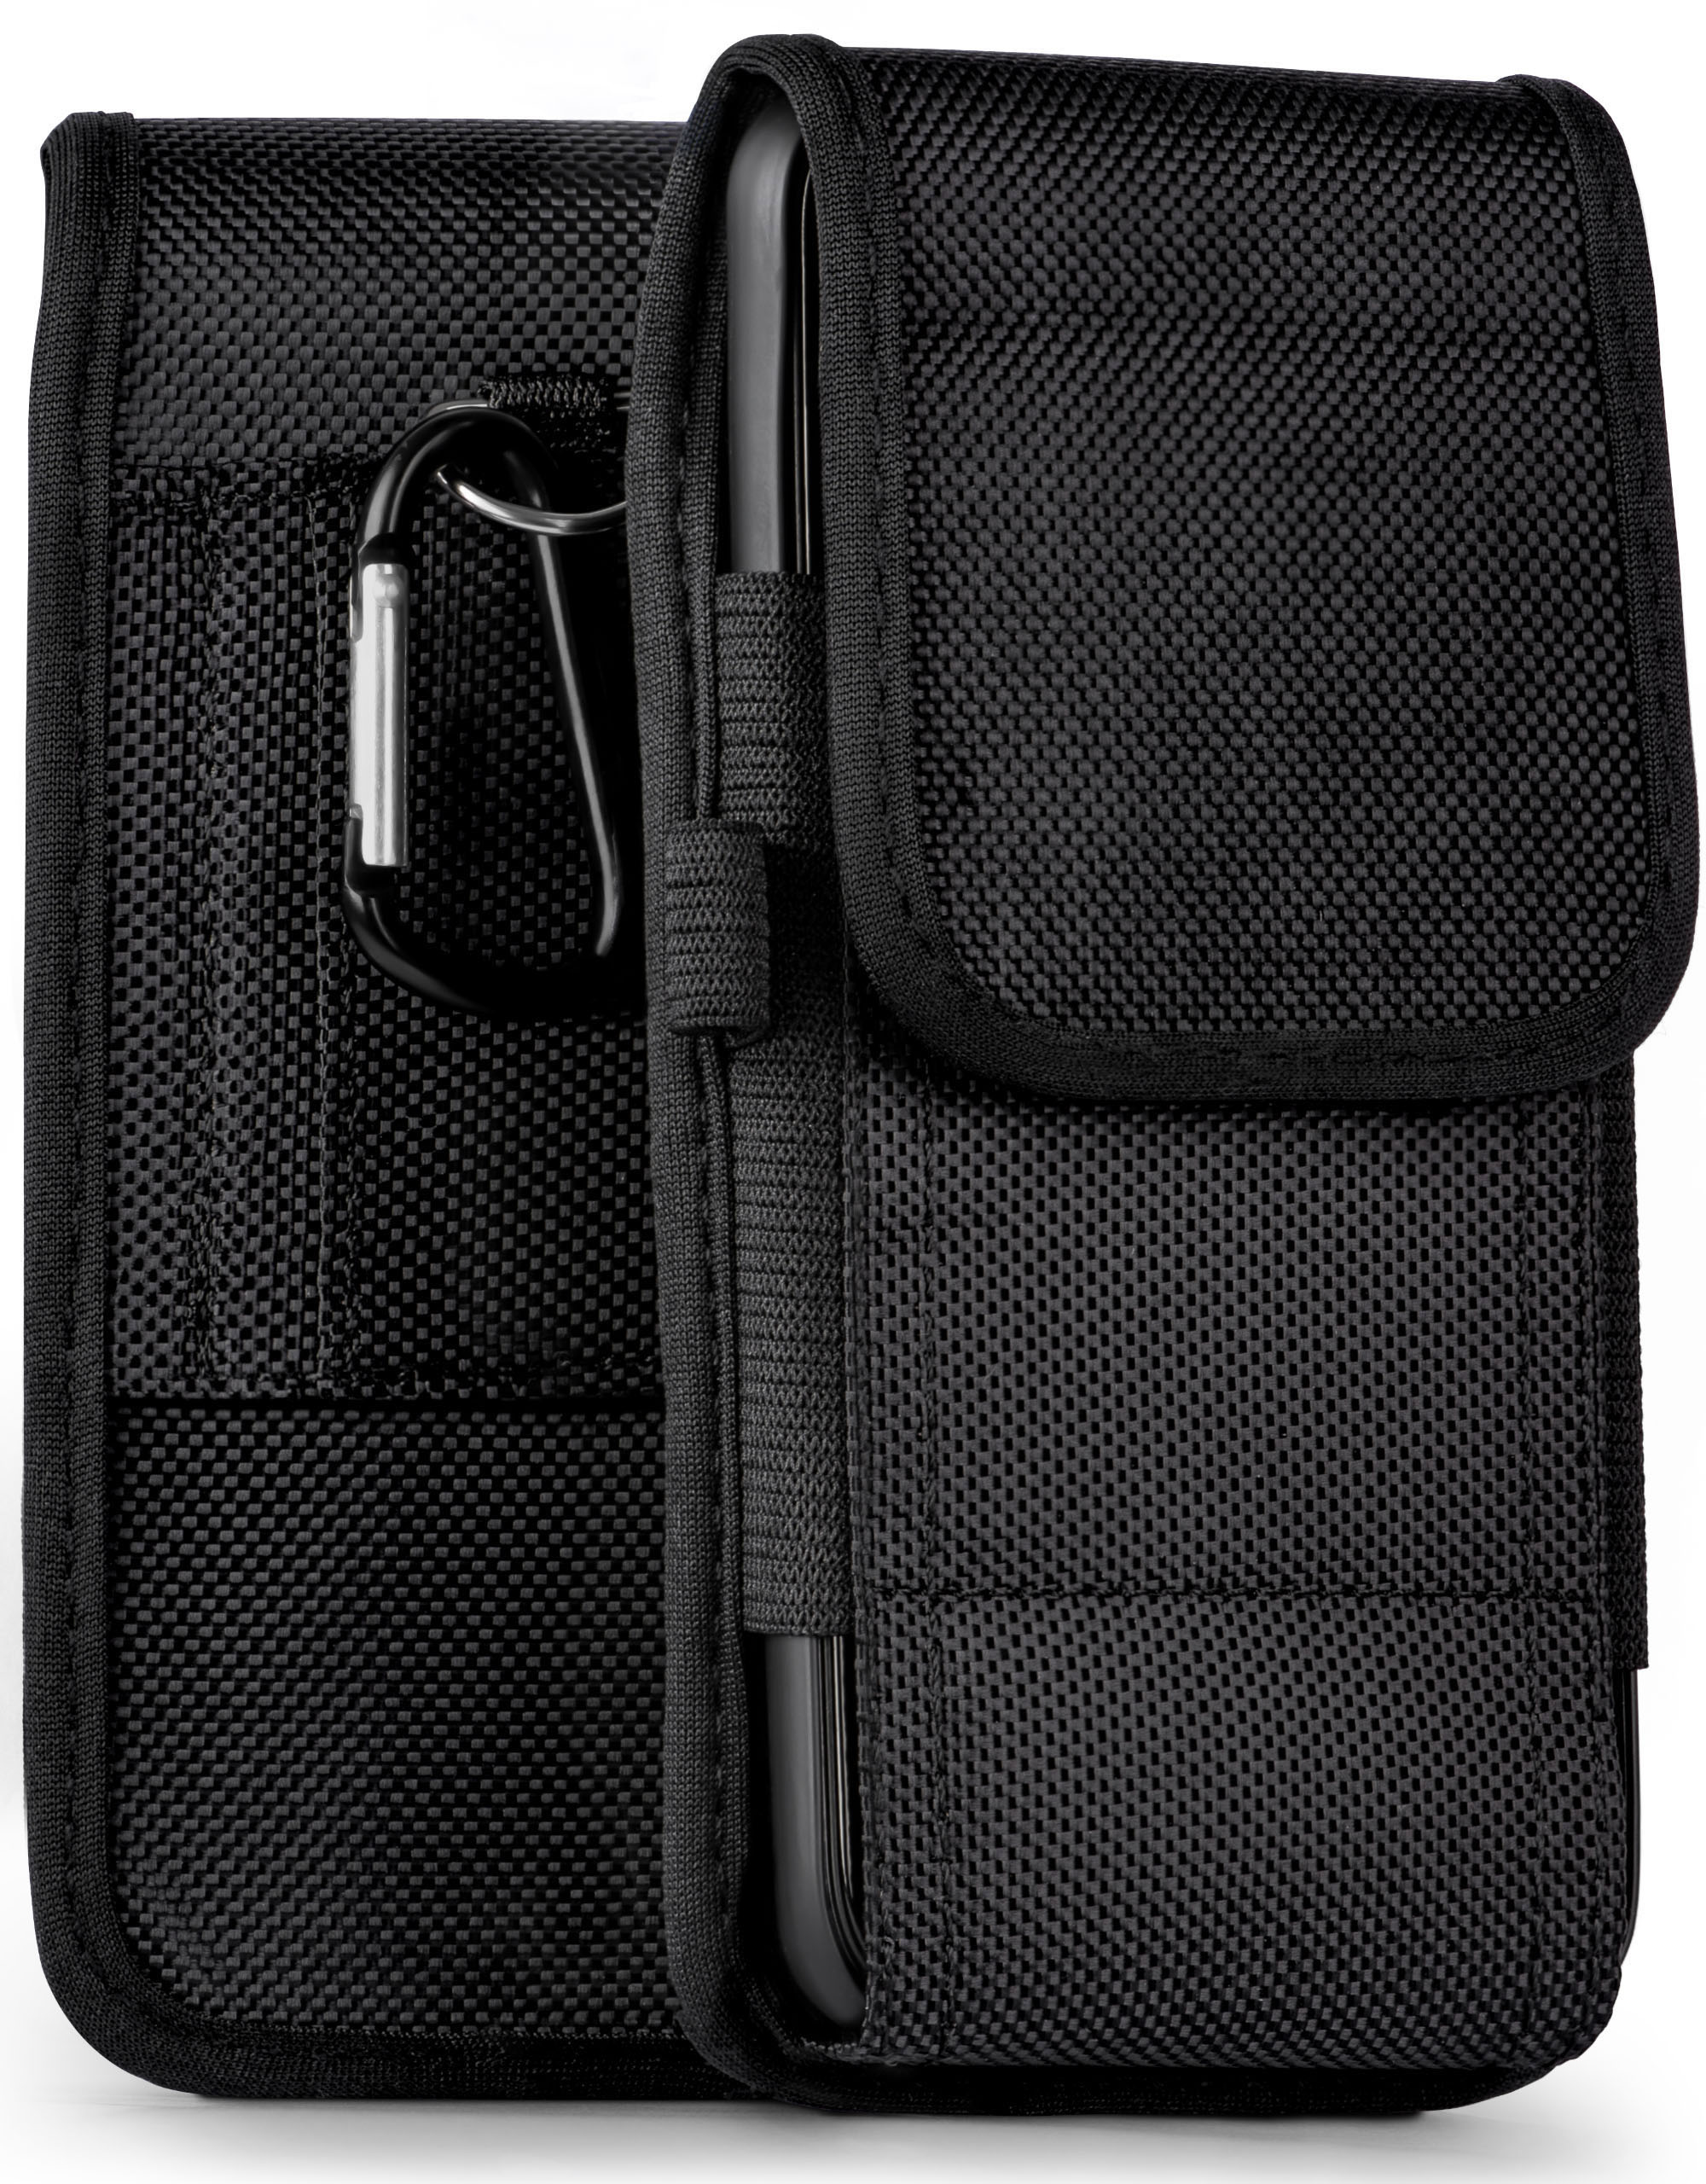 Case, P40, Holster, MOEX Trail Huawei, Agility